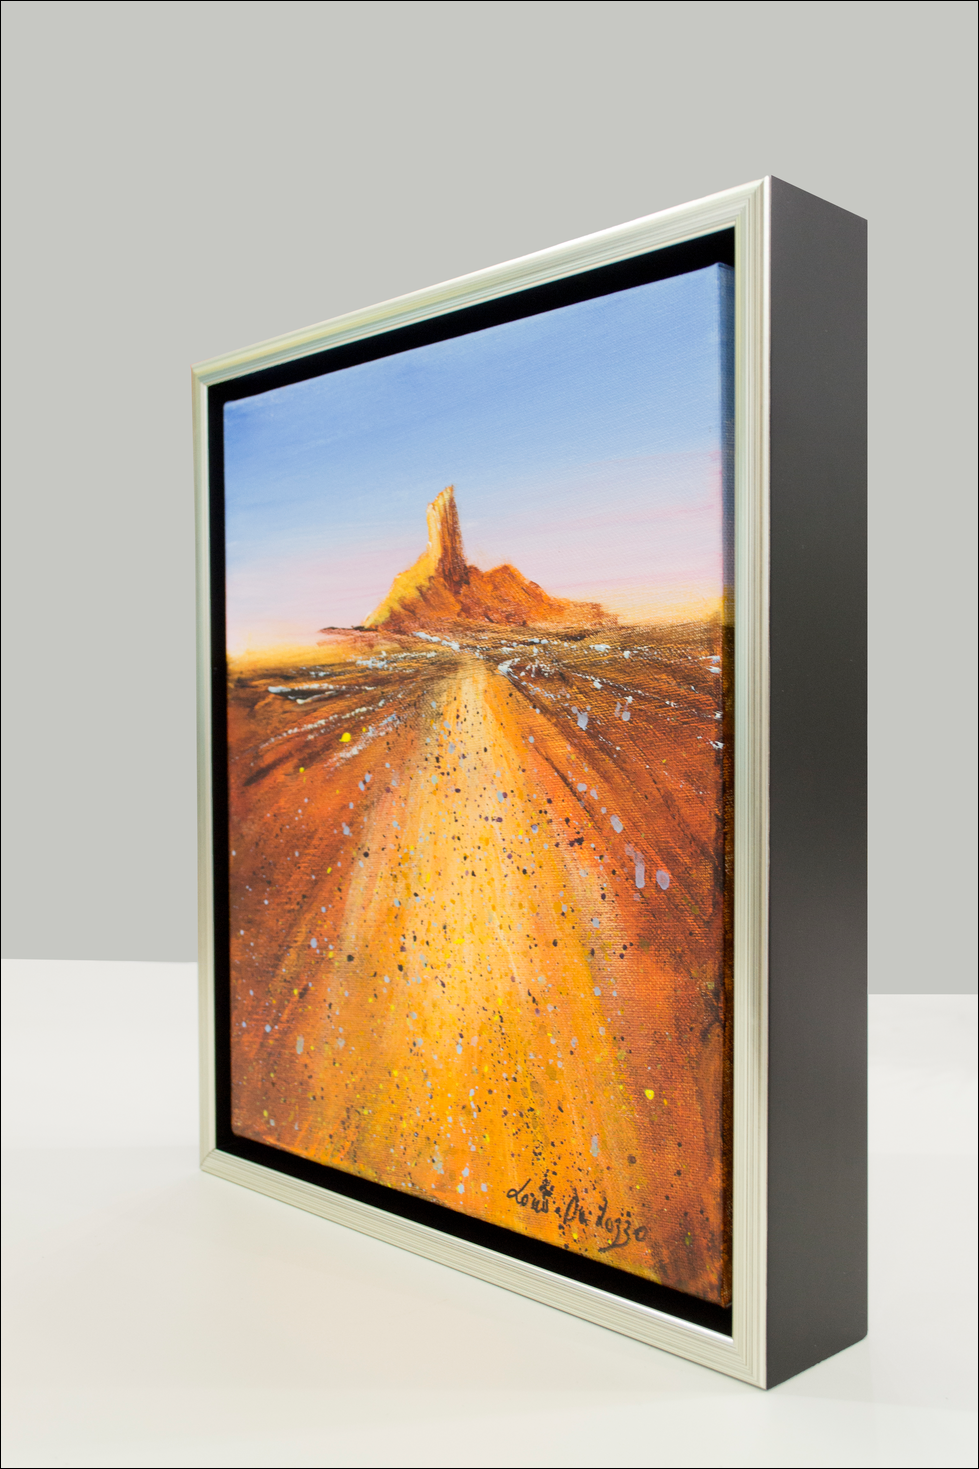 Framed Side View Of Landscape Painting "Study For Towards Chamber Pillar NT" By Louis Dalozzo